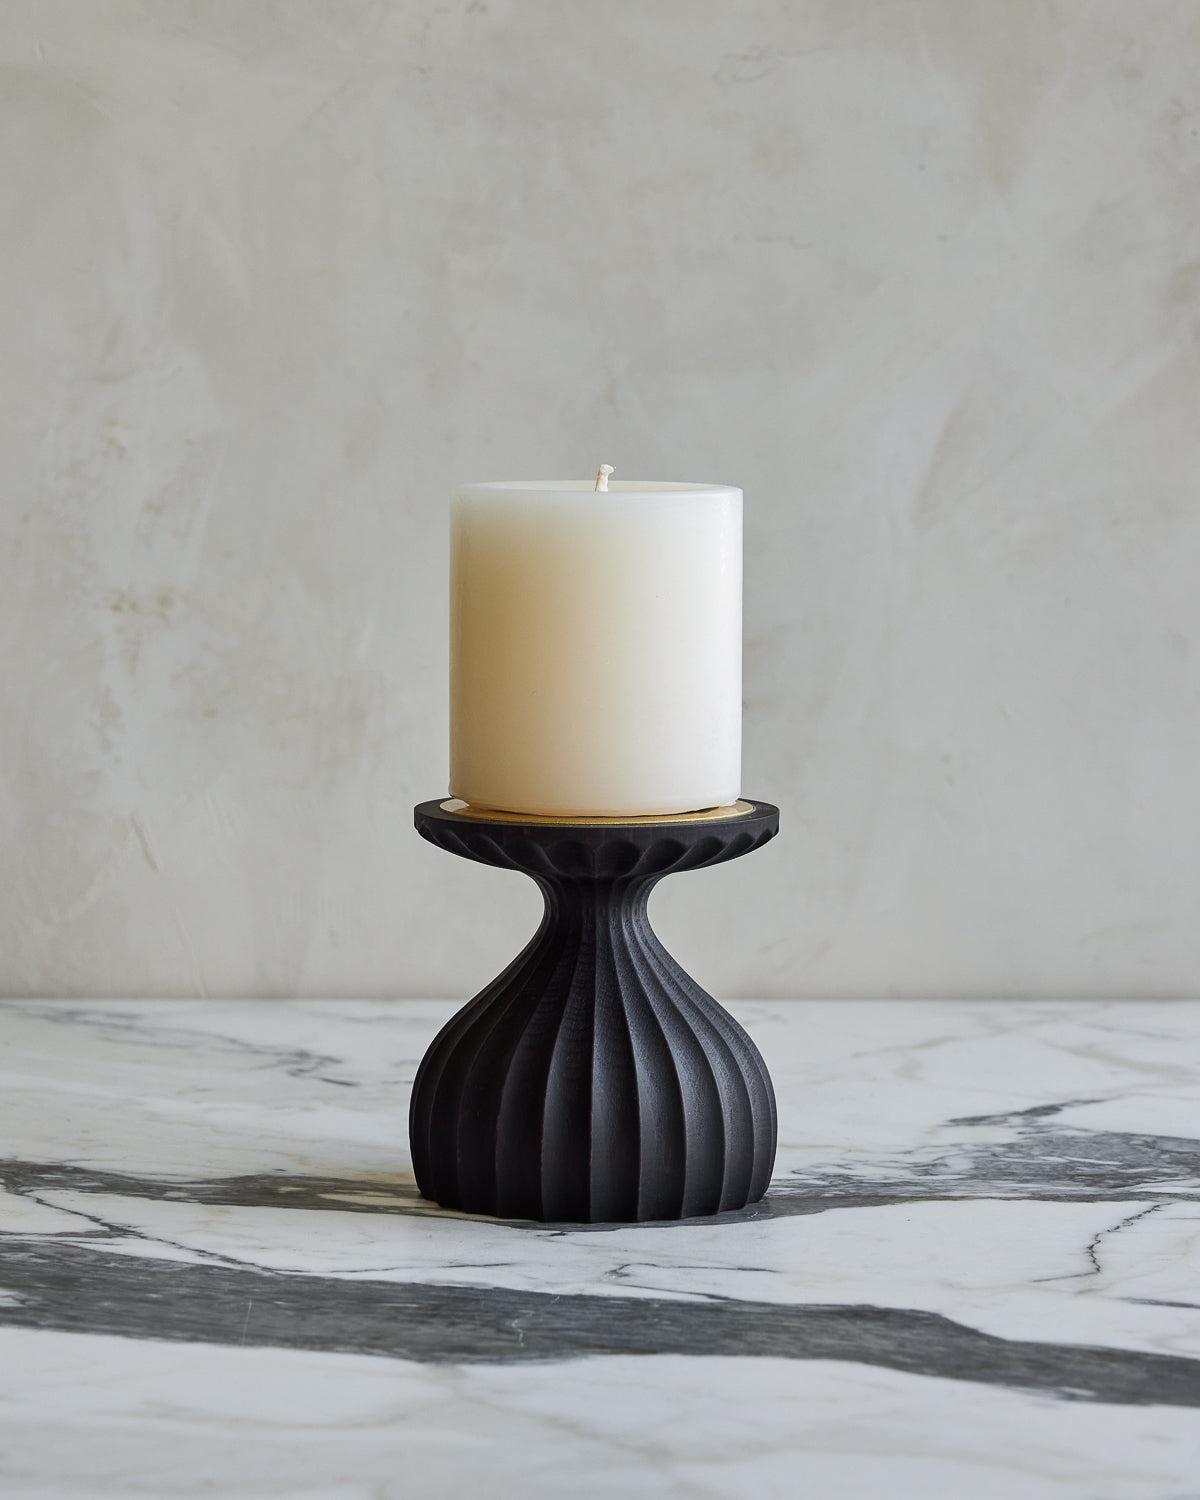 Short grooved dark wash maple wooden pillar candle holder with brass accents with white pillar candle